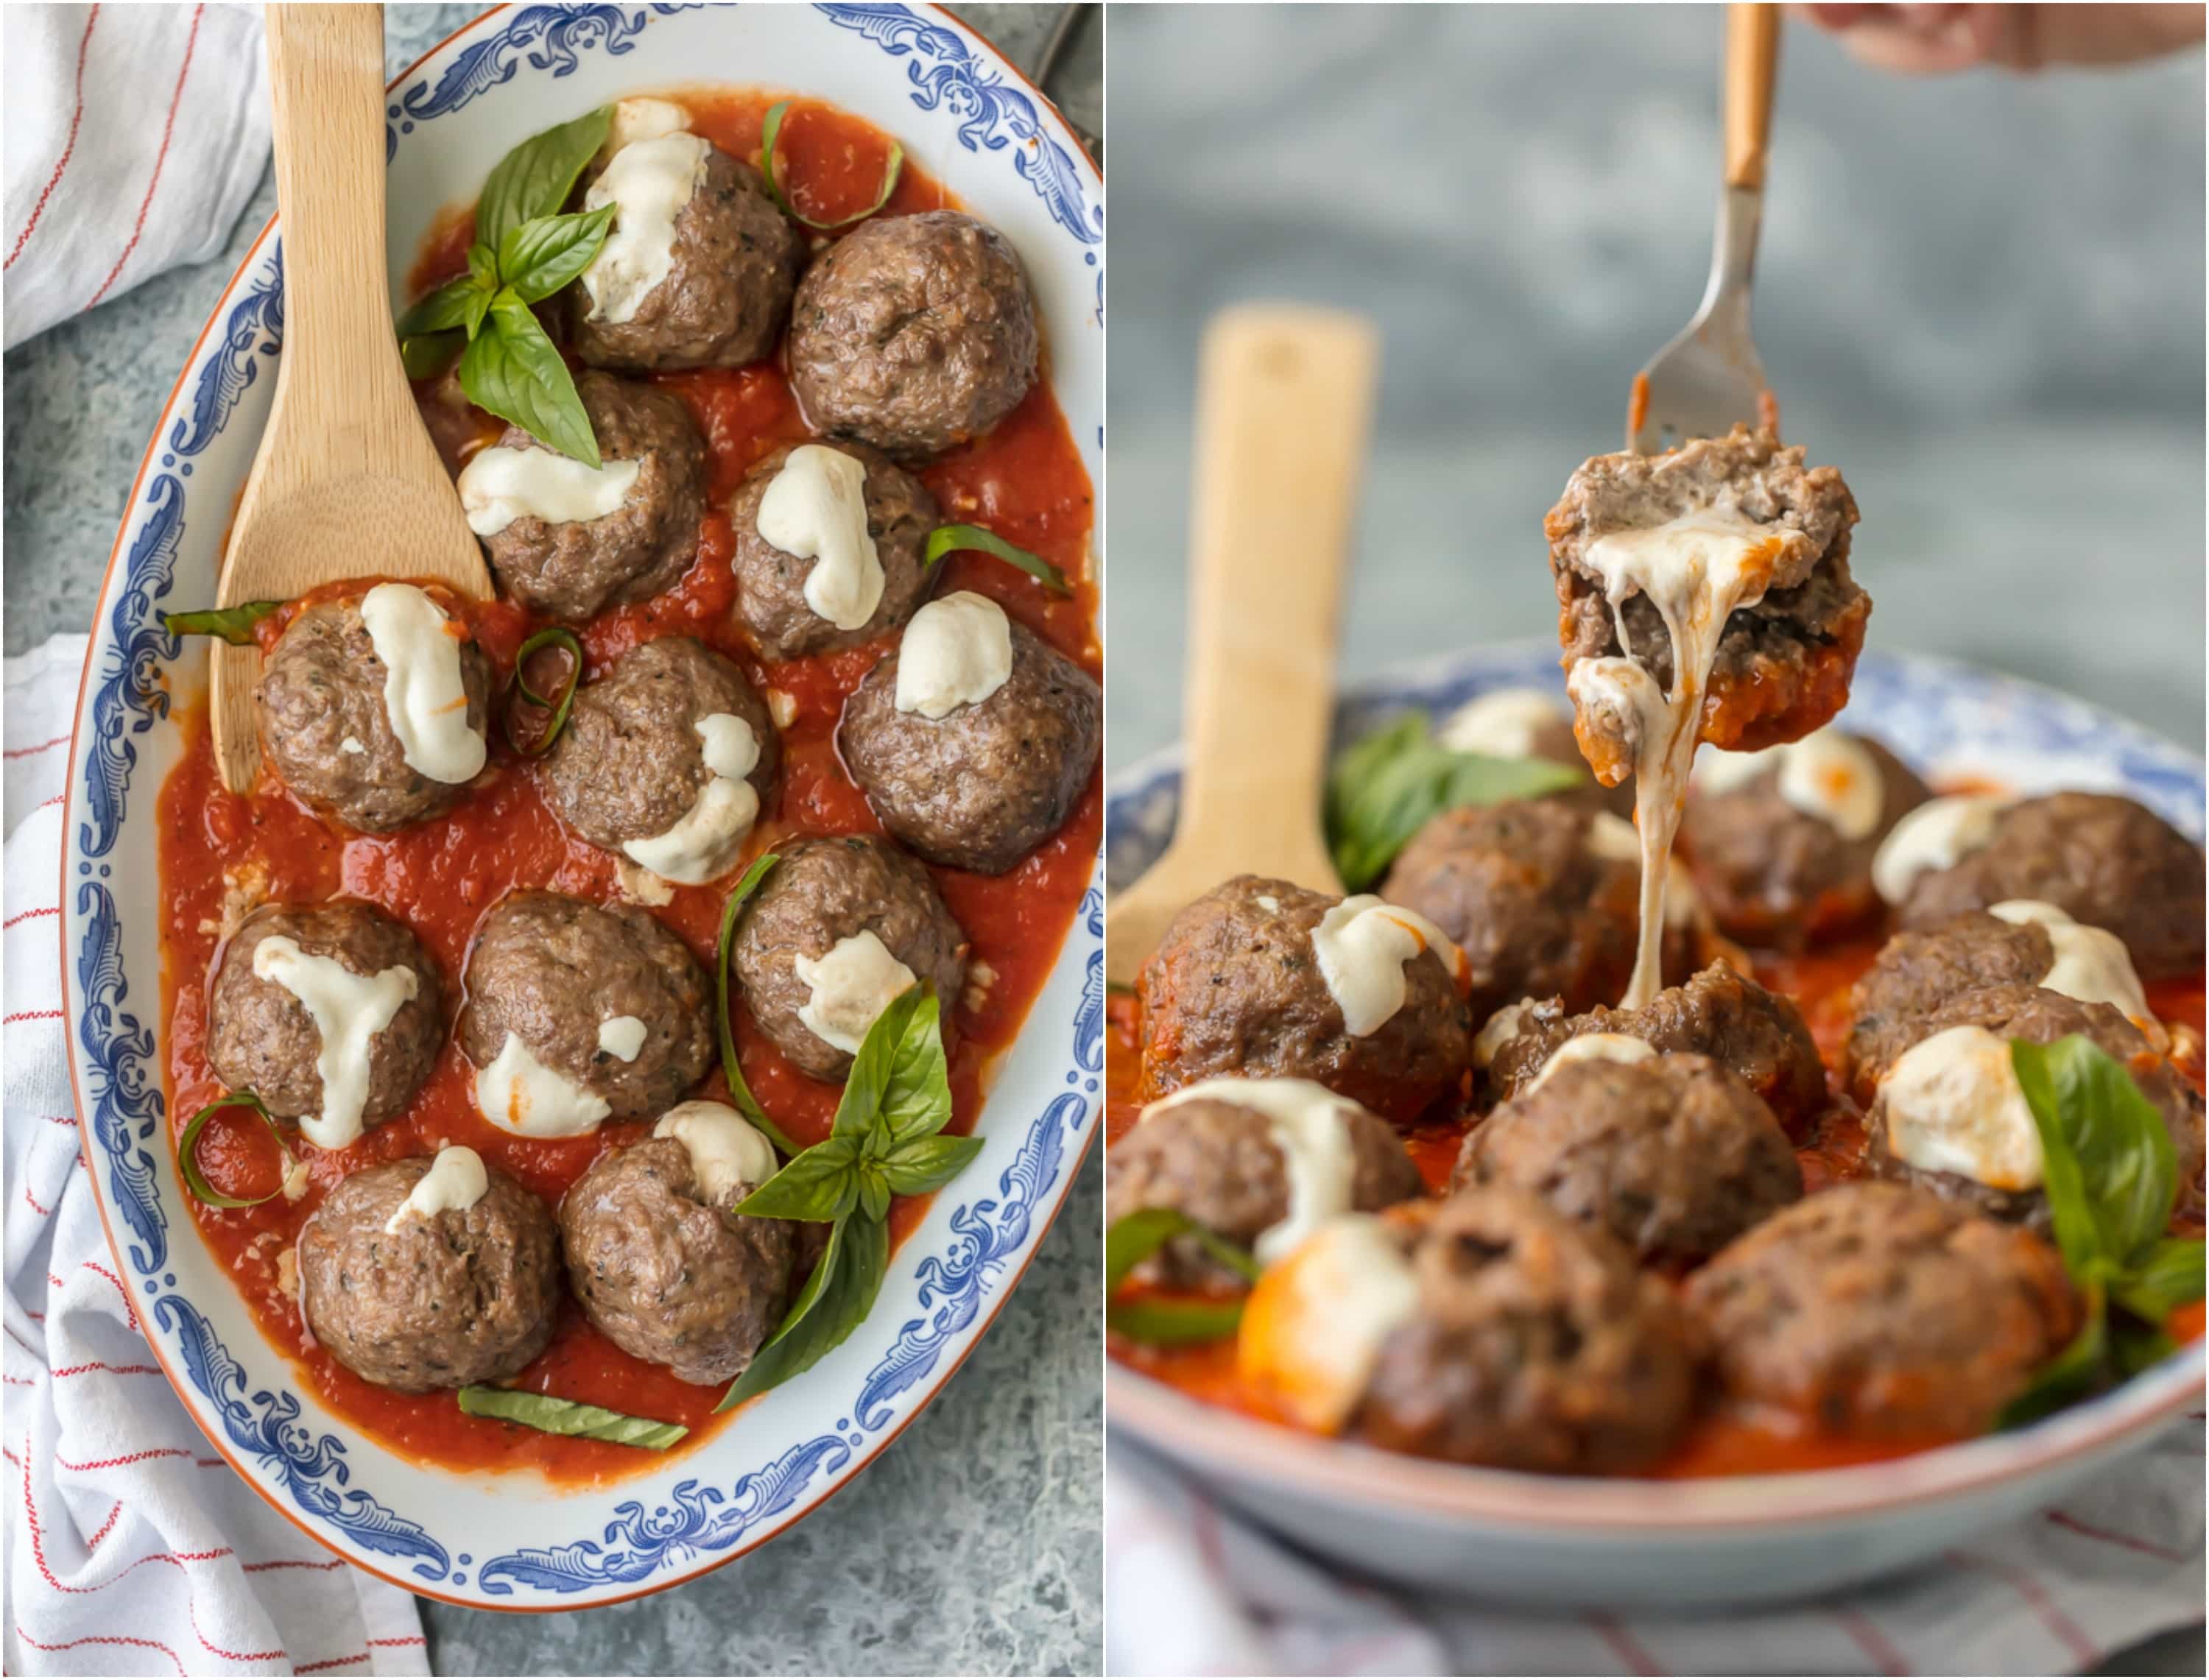 These MOZZARELLA STUFFED ITALIAN MEATBALLS are the ultimate appetizer. Stuffed with whole milk mozzarella and oh so juicy and tender, you better make a double batch.